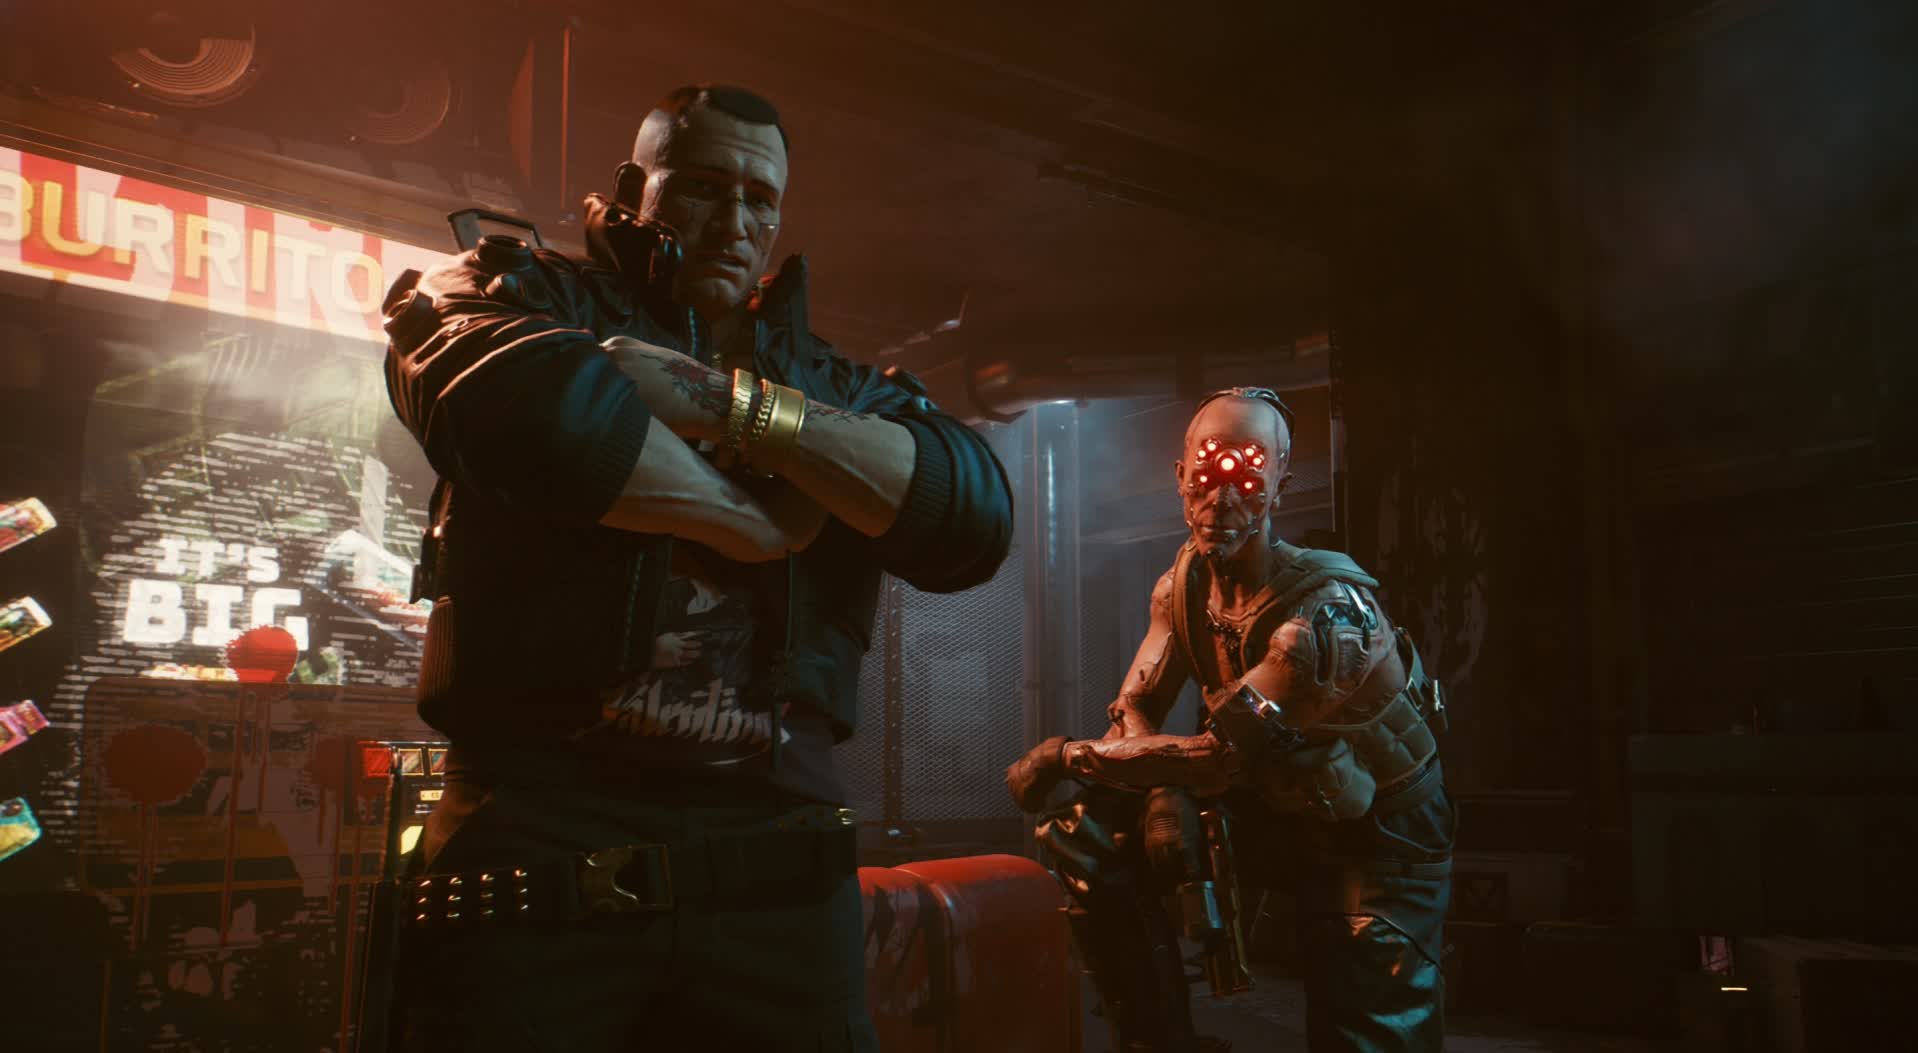 Cyberpunk 2077 sold over 13 million copies in 10 days